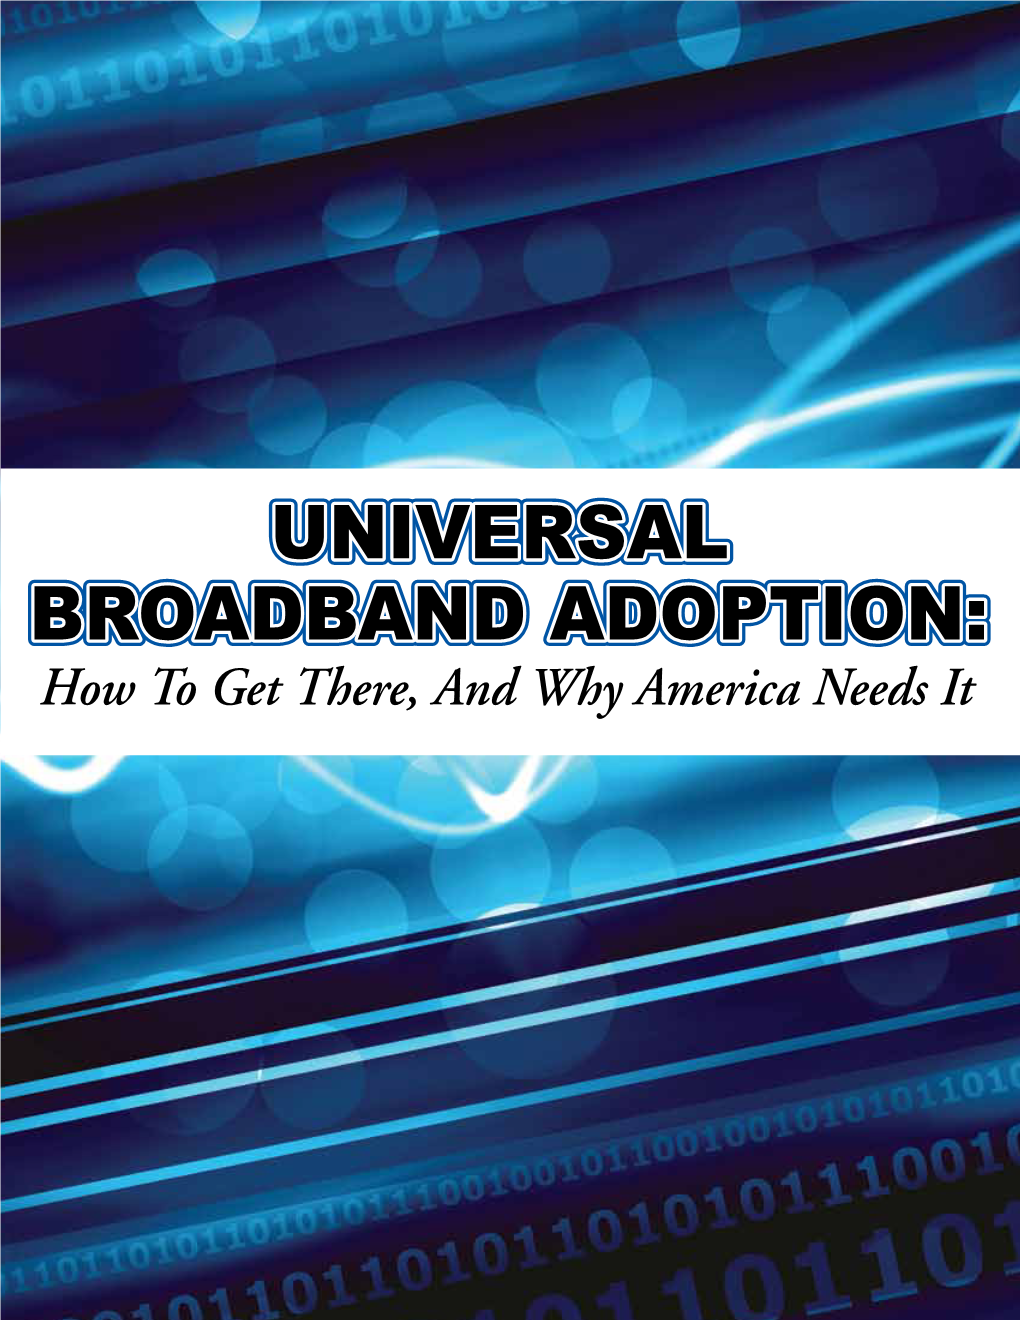 UNIVERSAL BROADBAND ADOPTION: How to Get There, and Why America Needs It